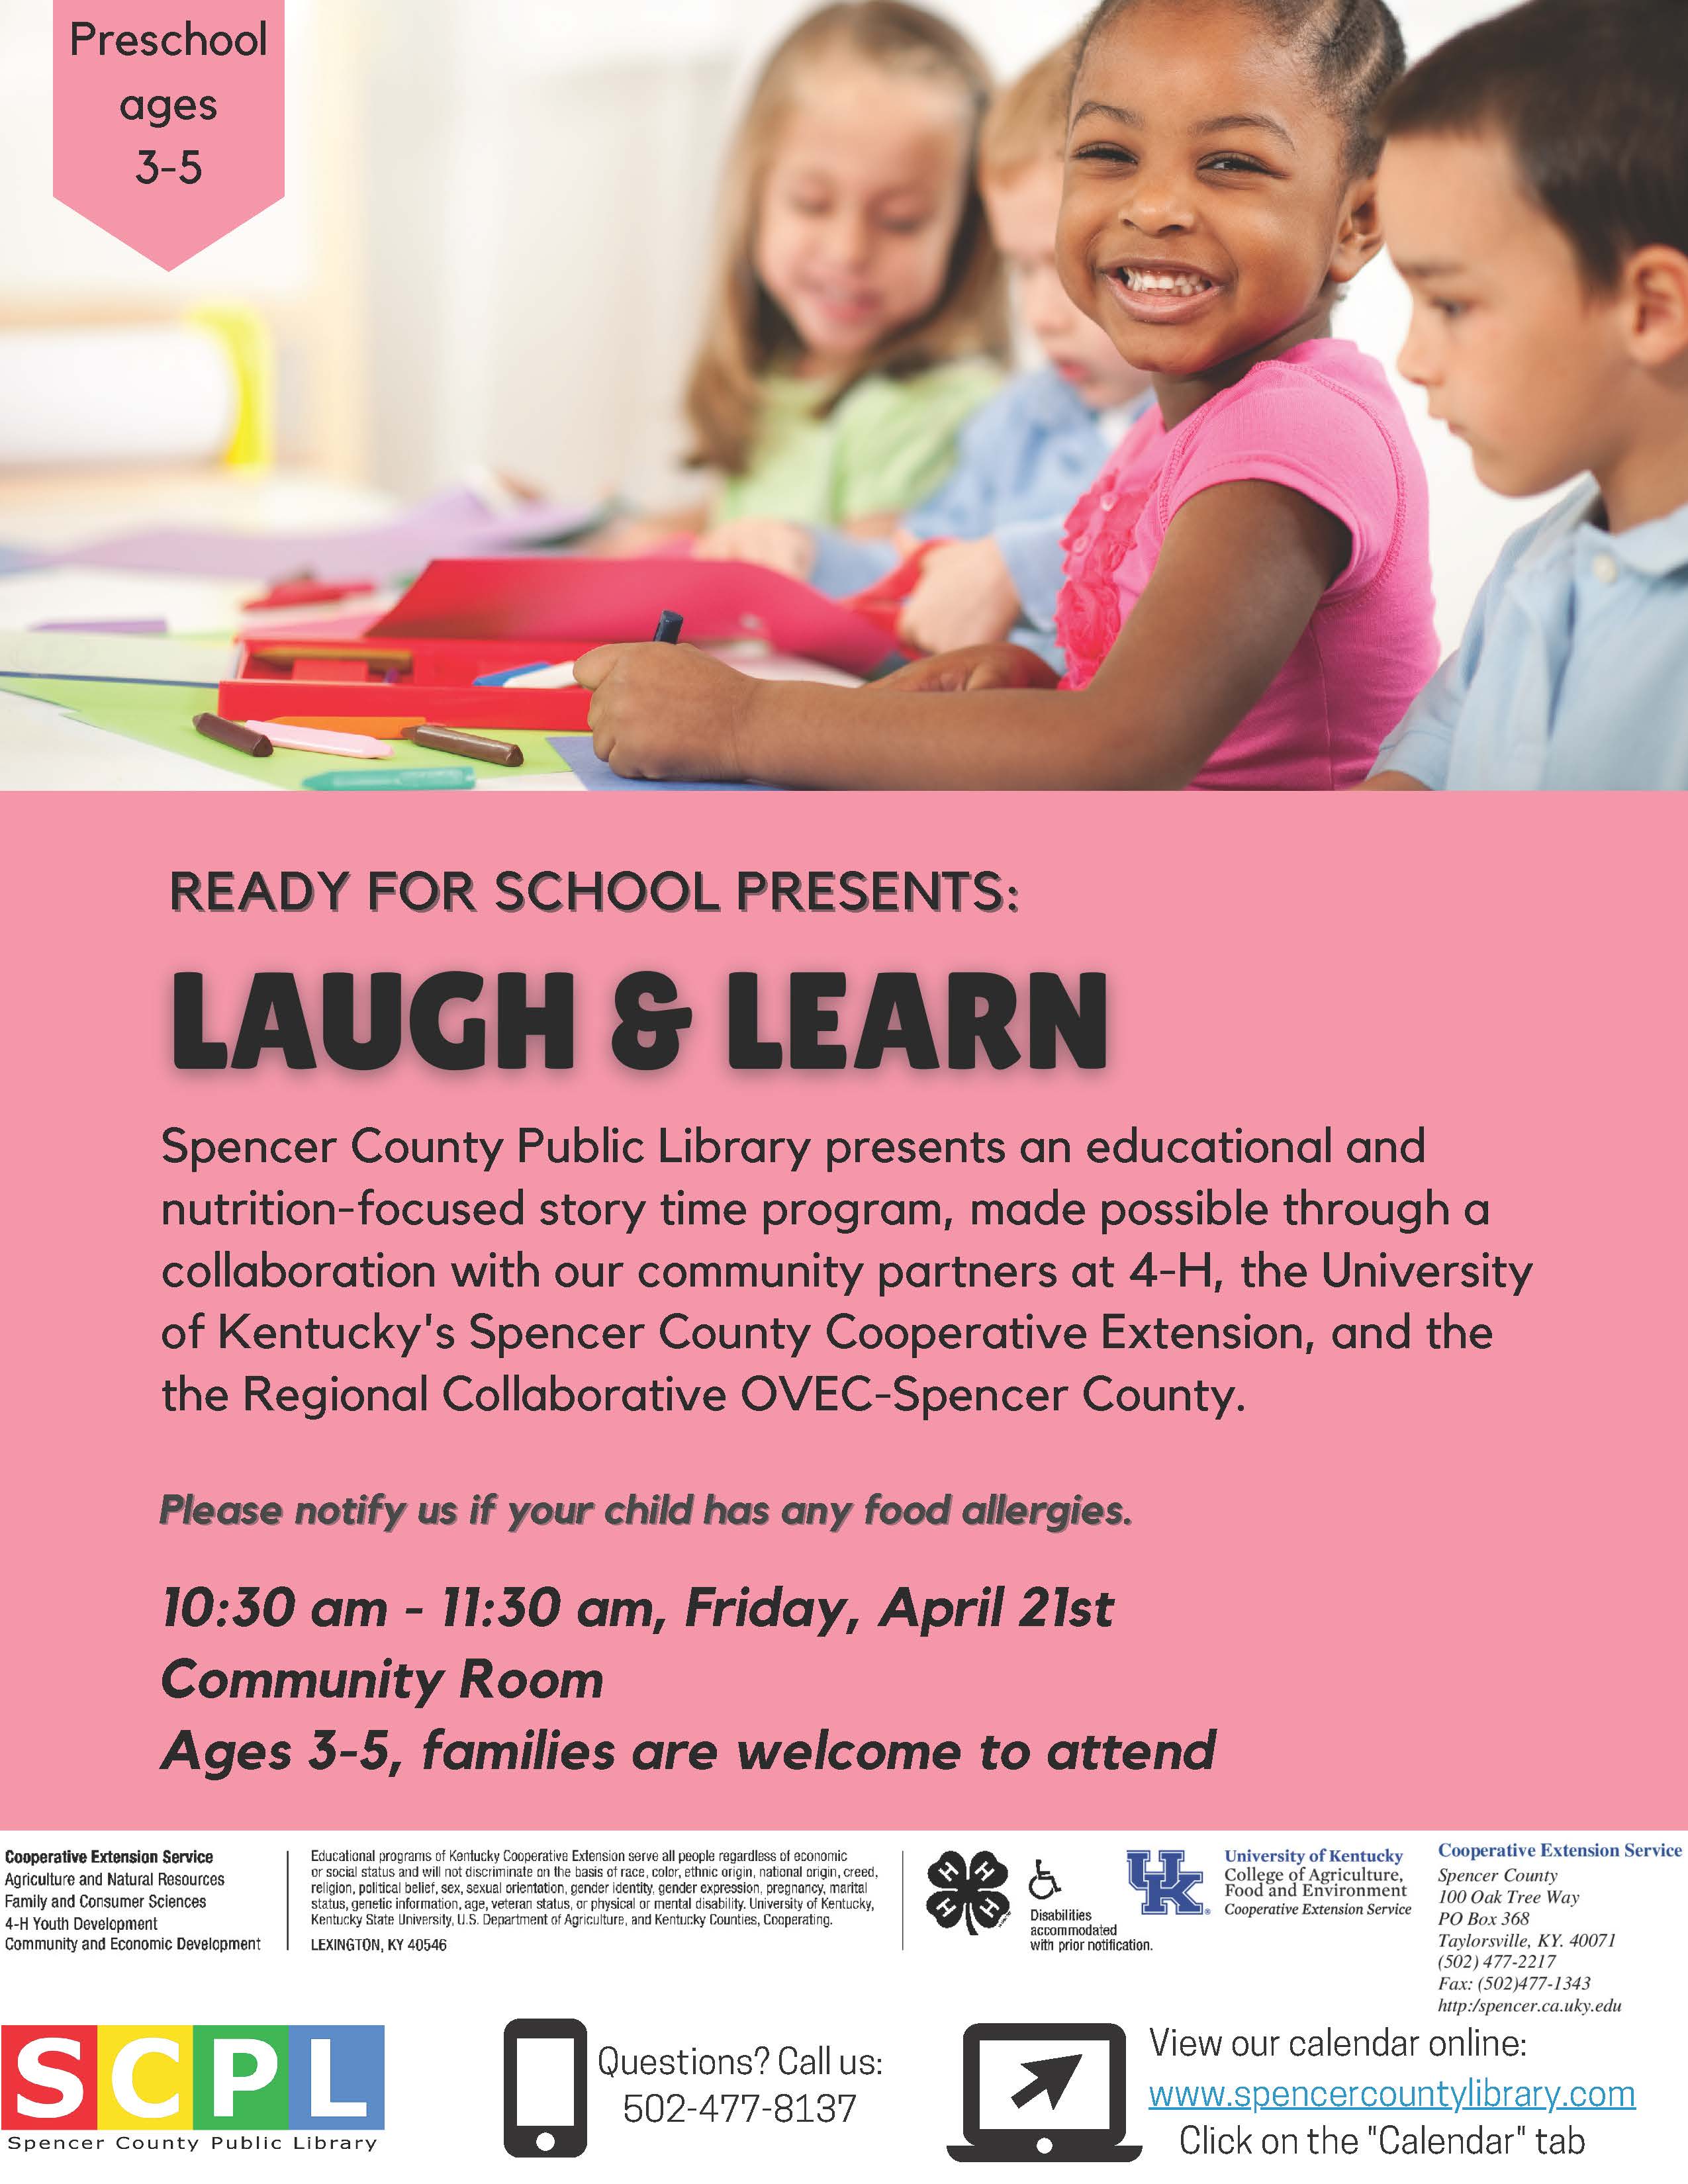 Pink flyer with smiling children with event details